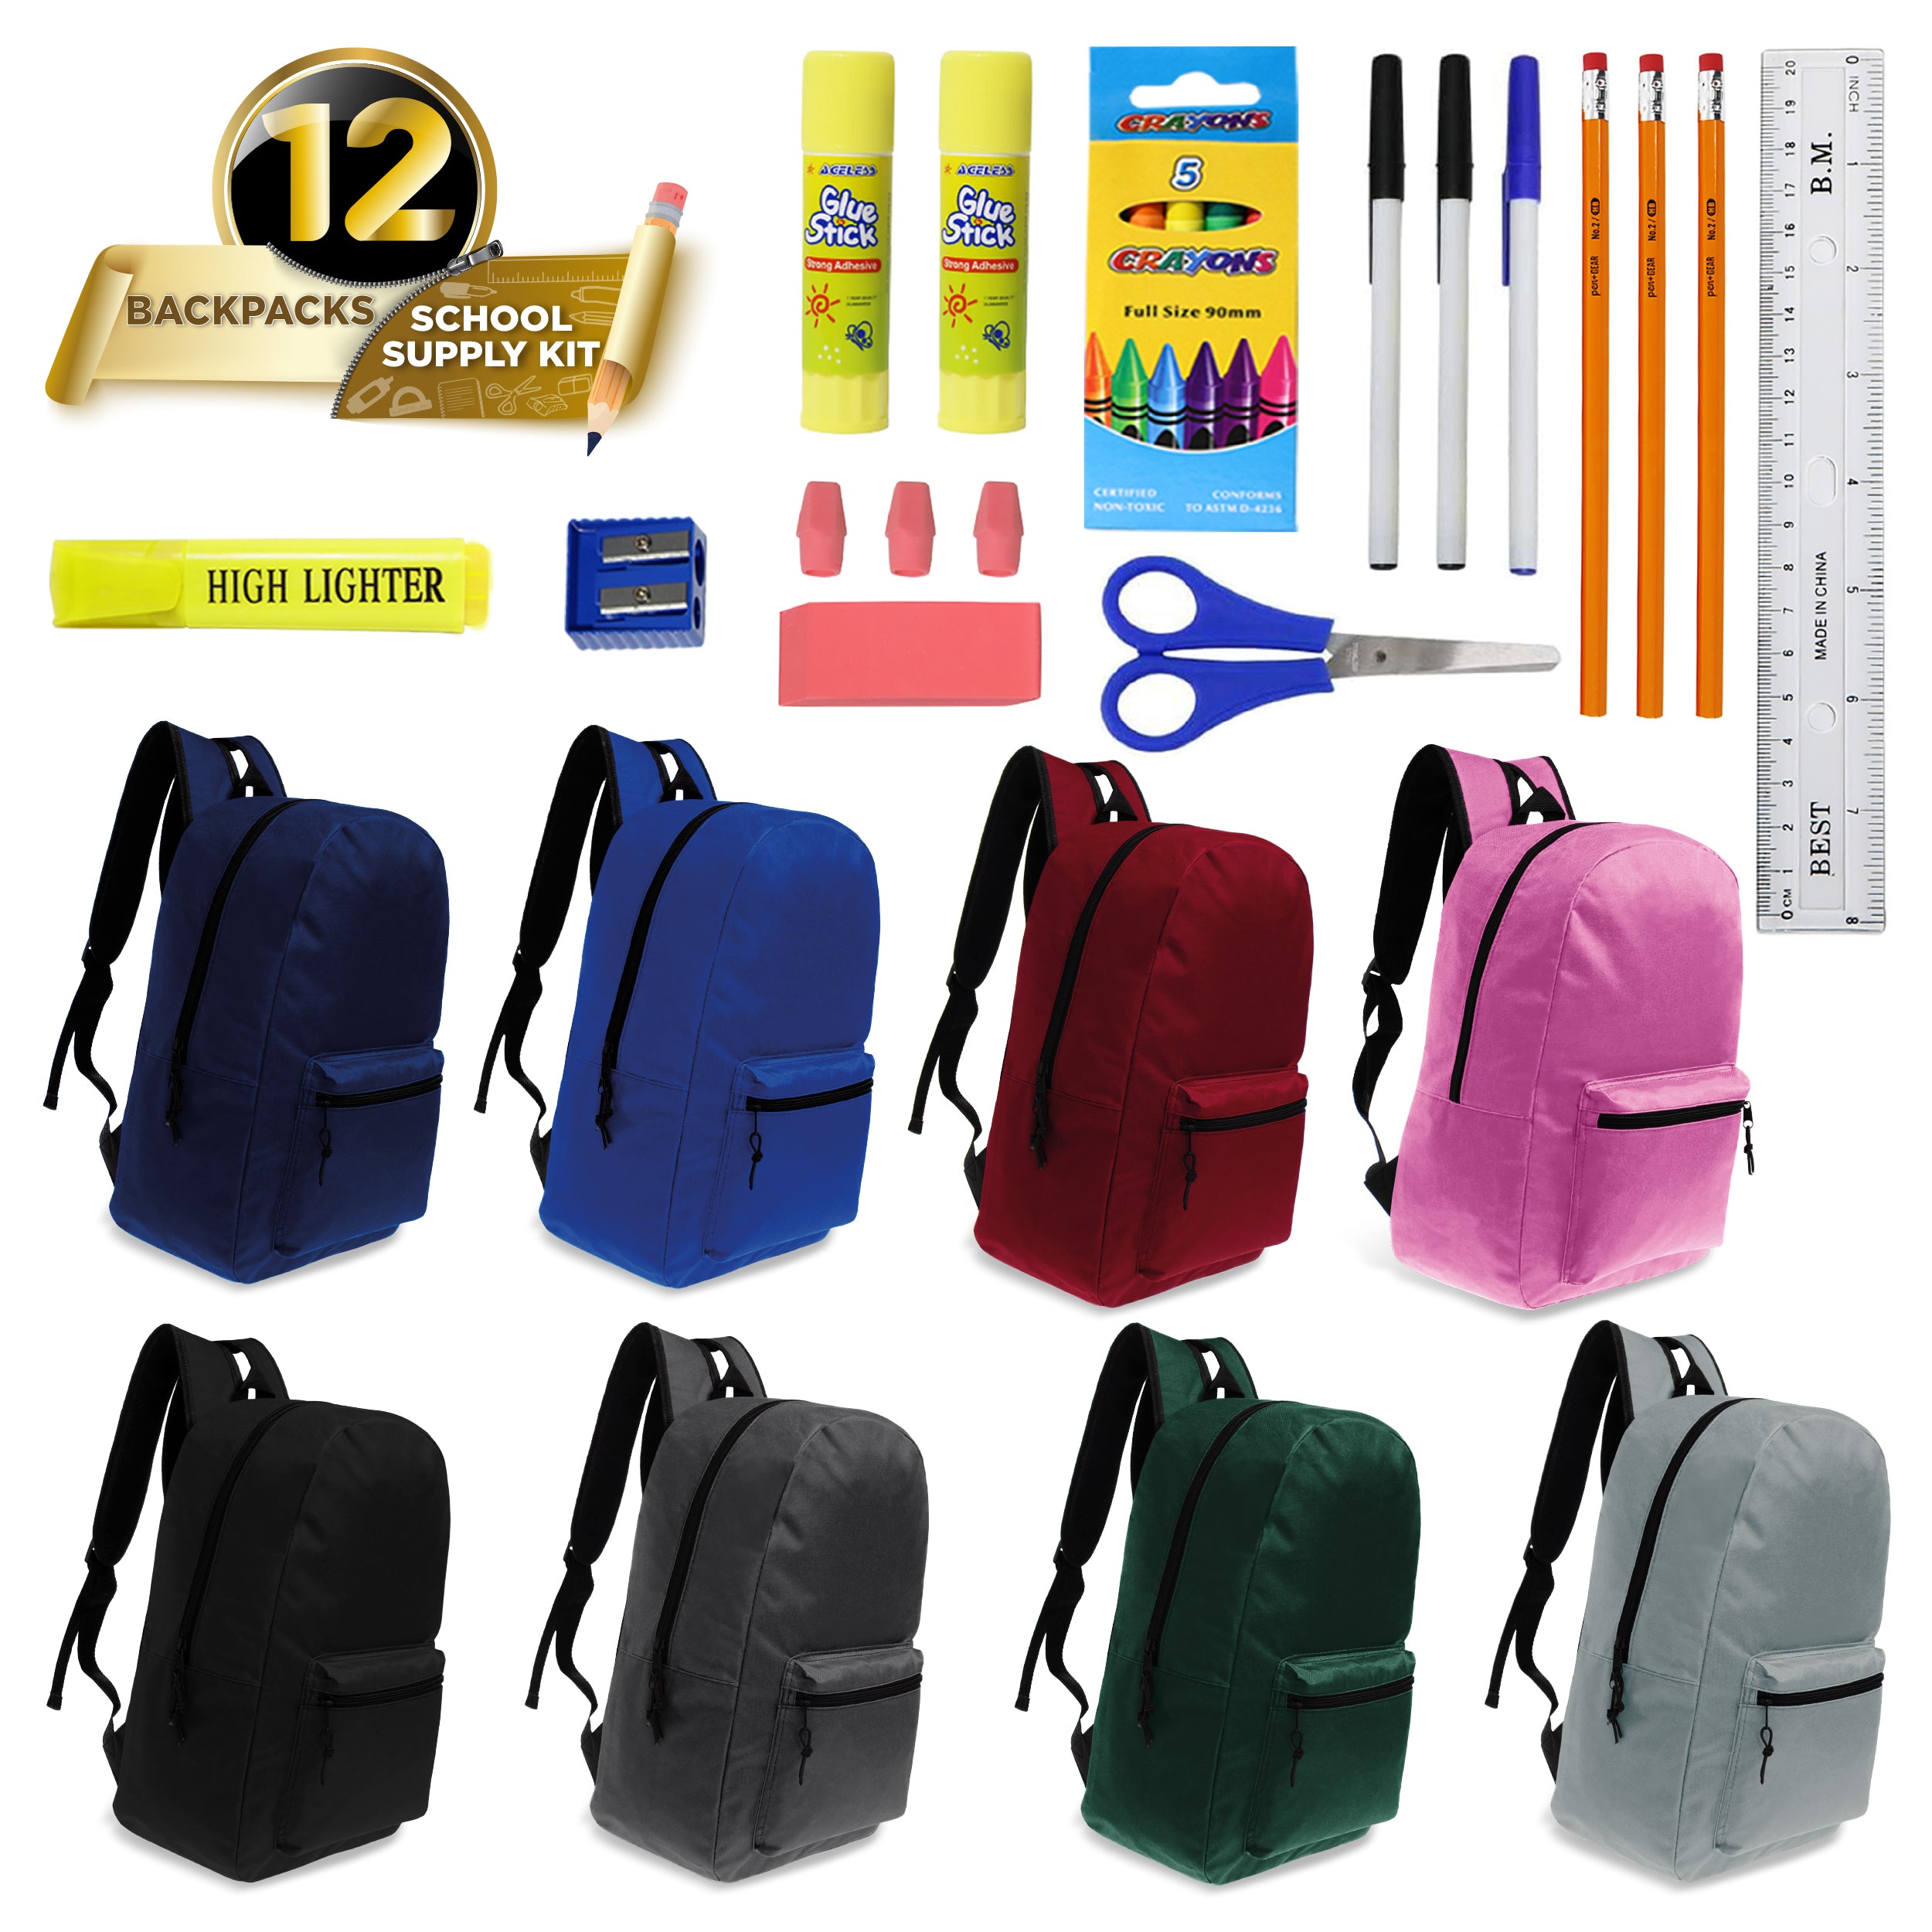 15 inches School Backpacks for Kids In Assorted Colors Bulk School Supplies Kit Case Of 12